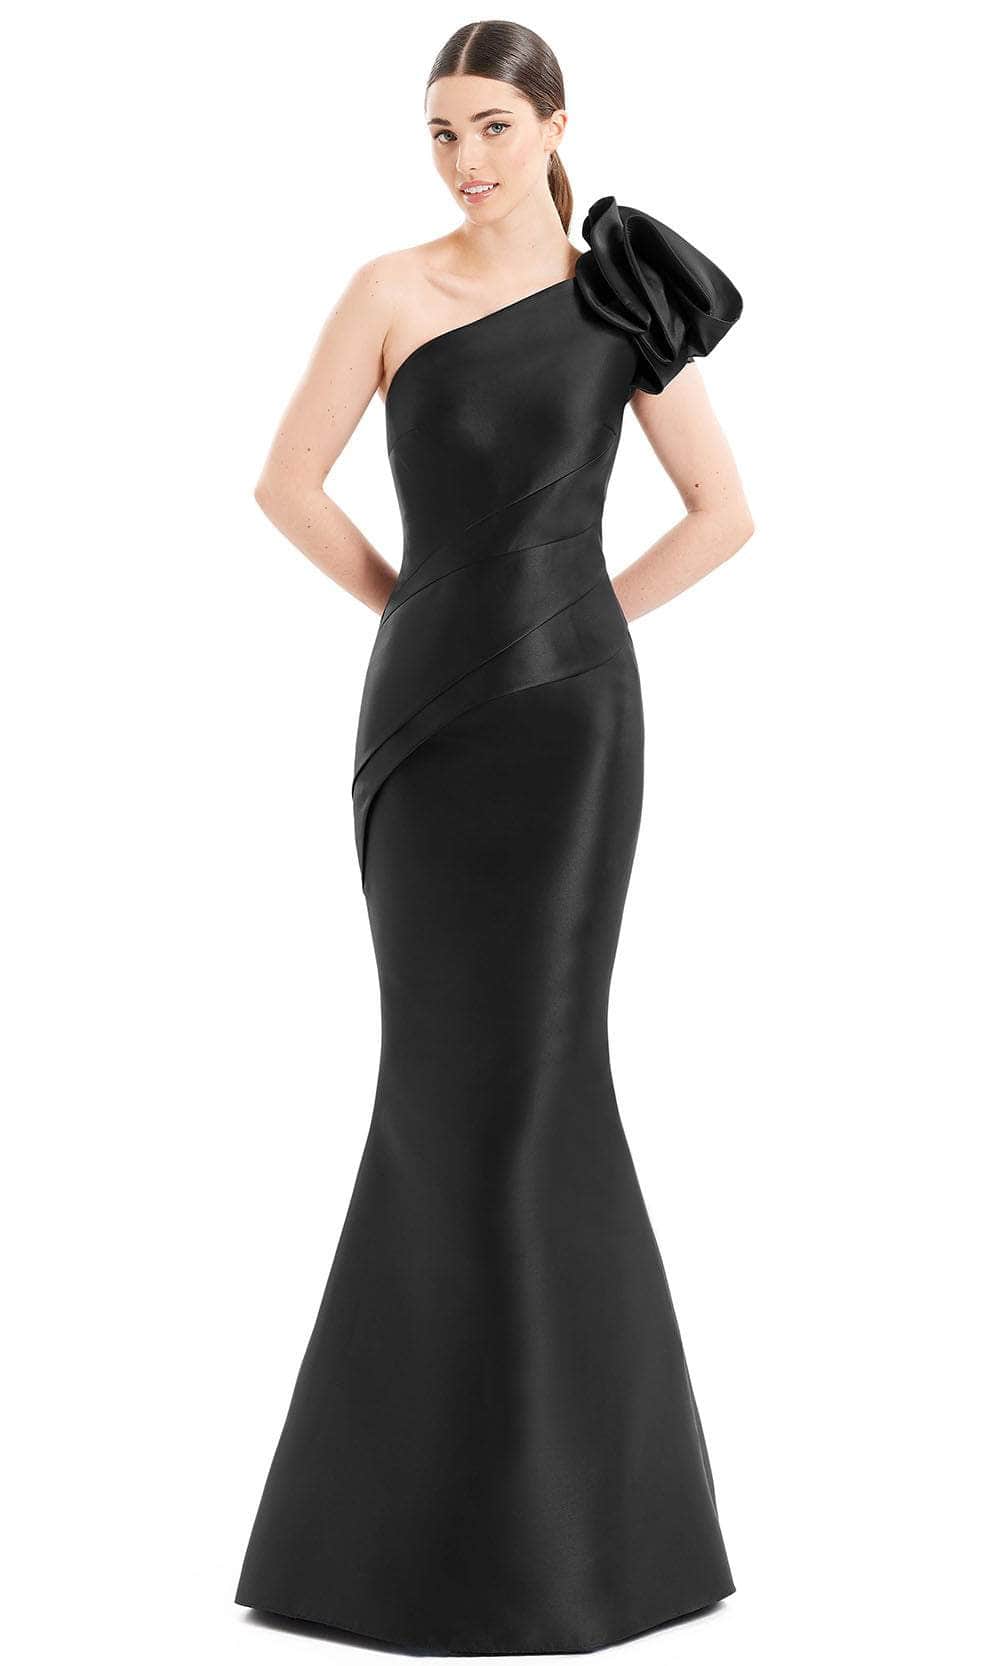 Alexander By Daymor 1673F22 - Asymmetric Pleated Peplum Evening Gown Special Occasion Dress 4 / Black